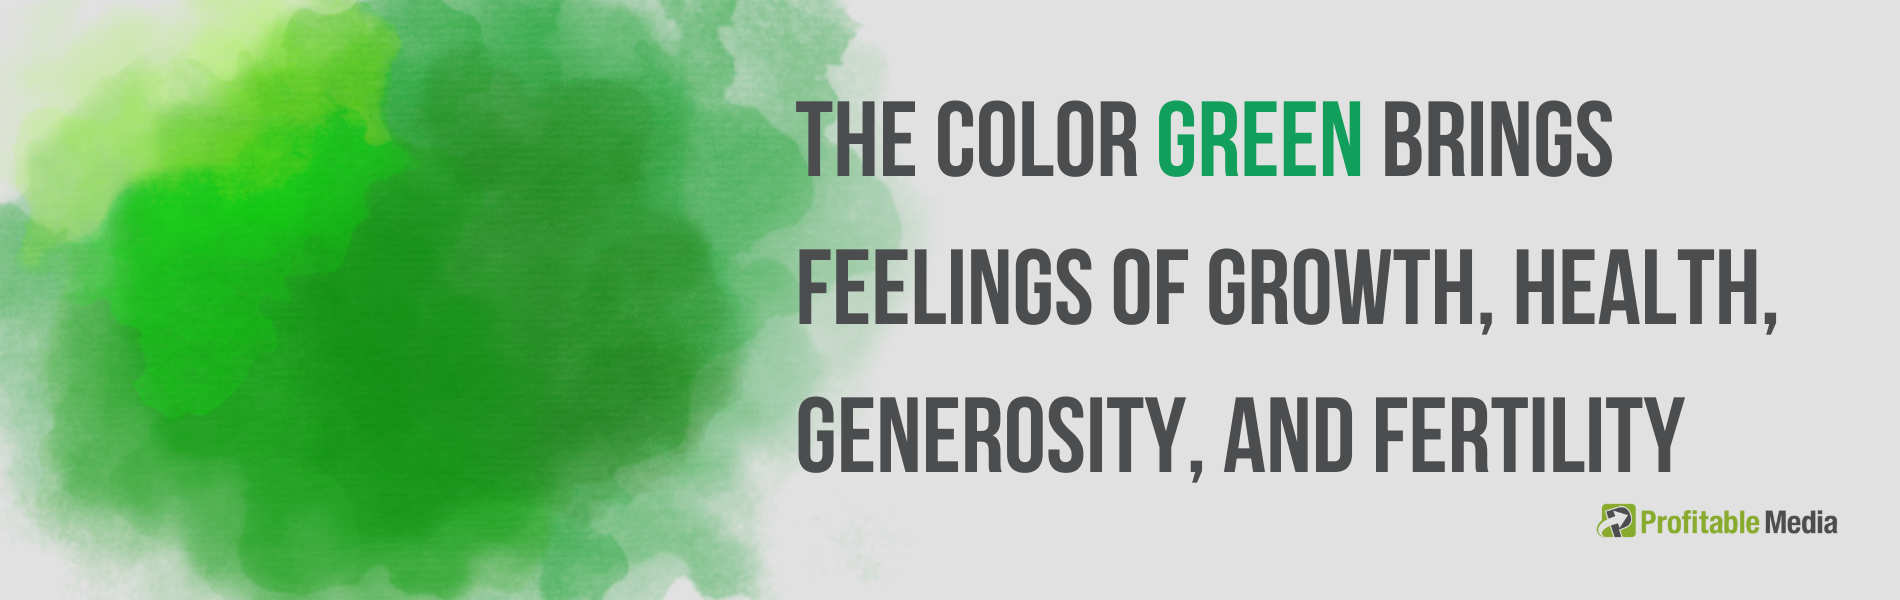 The meaning of the color green